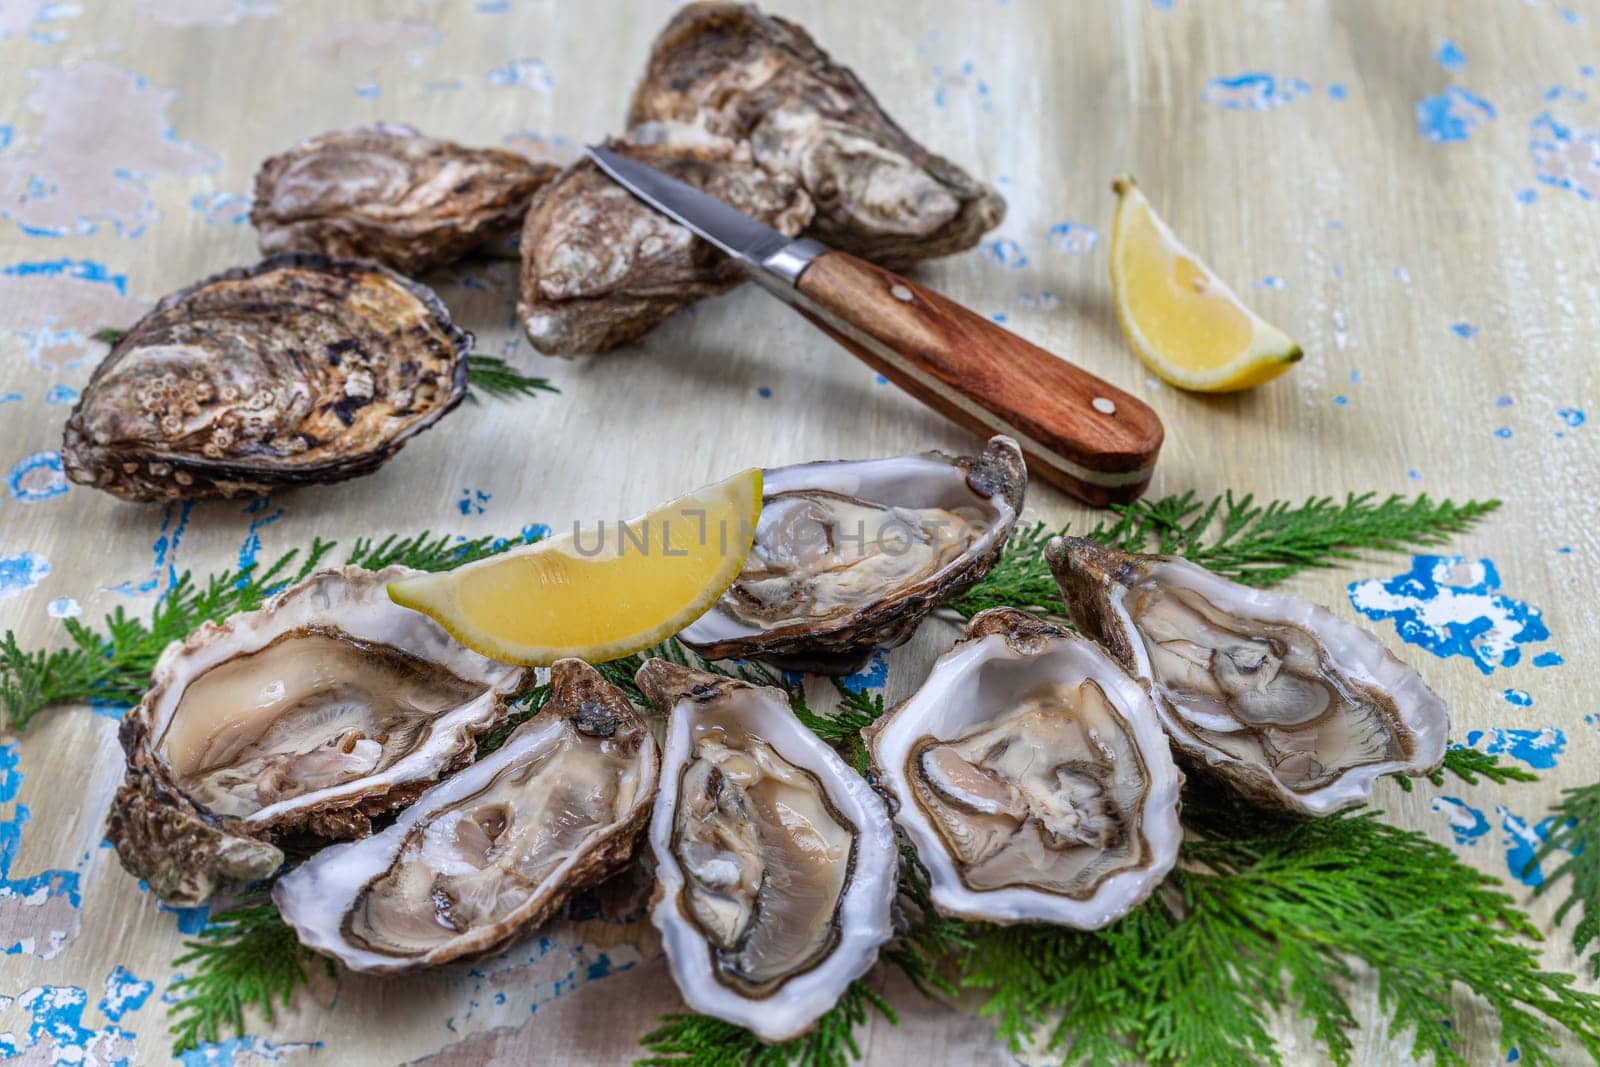 Opened Oysters on blue wooden background with oyster knife and lemon